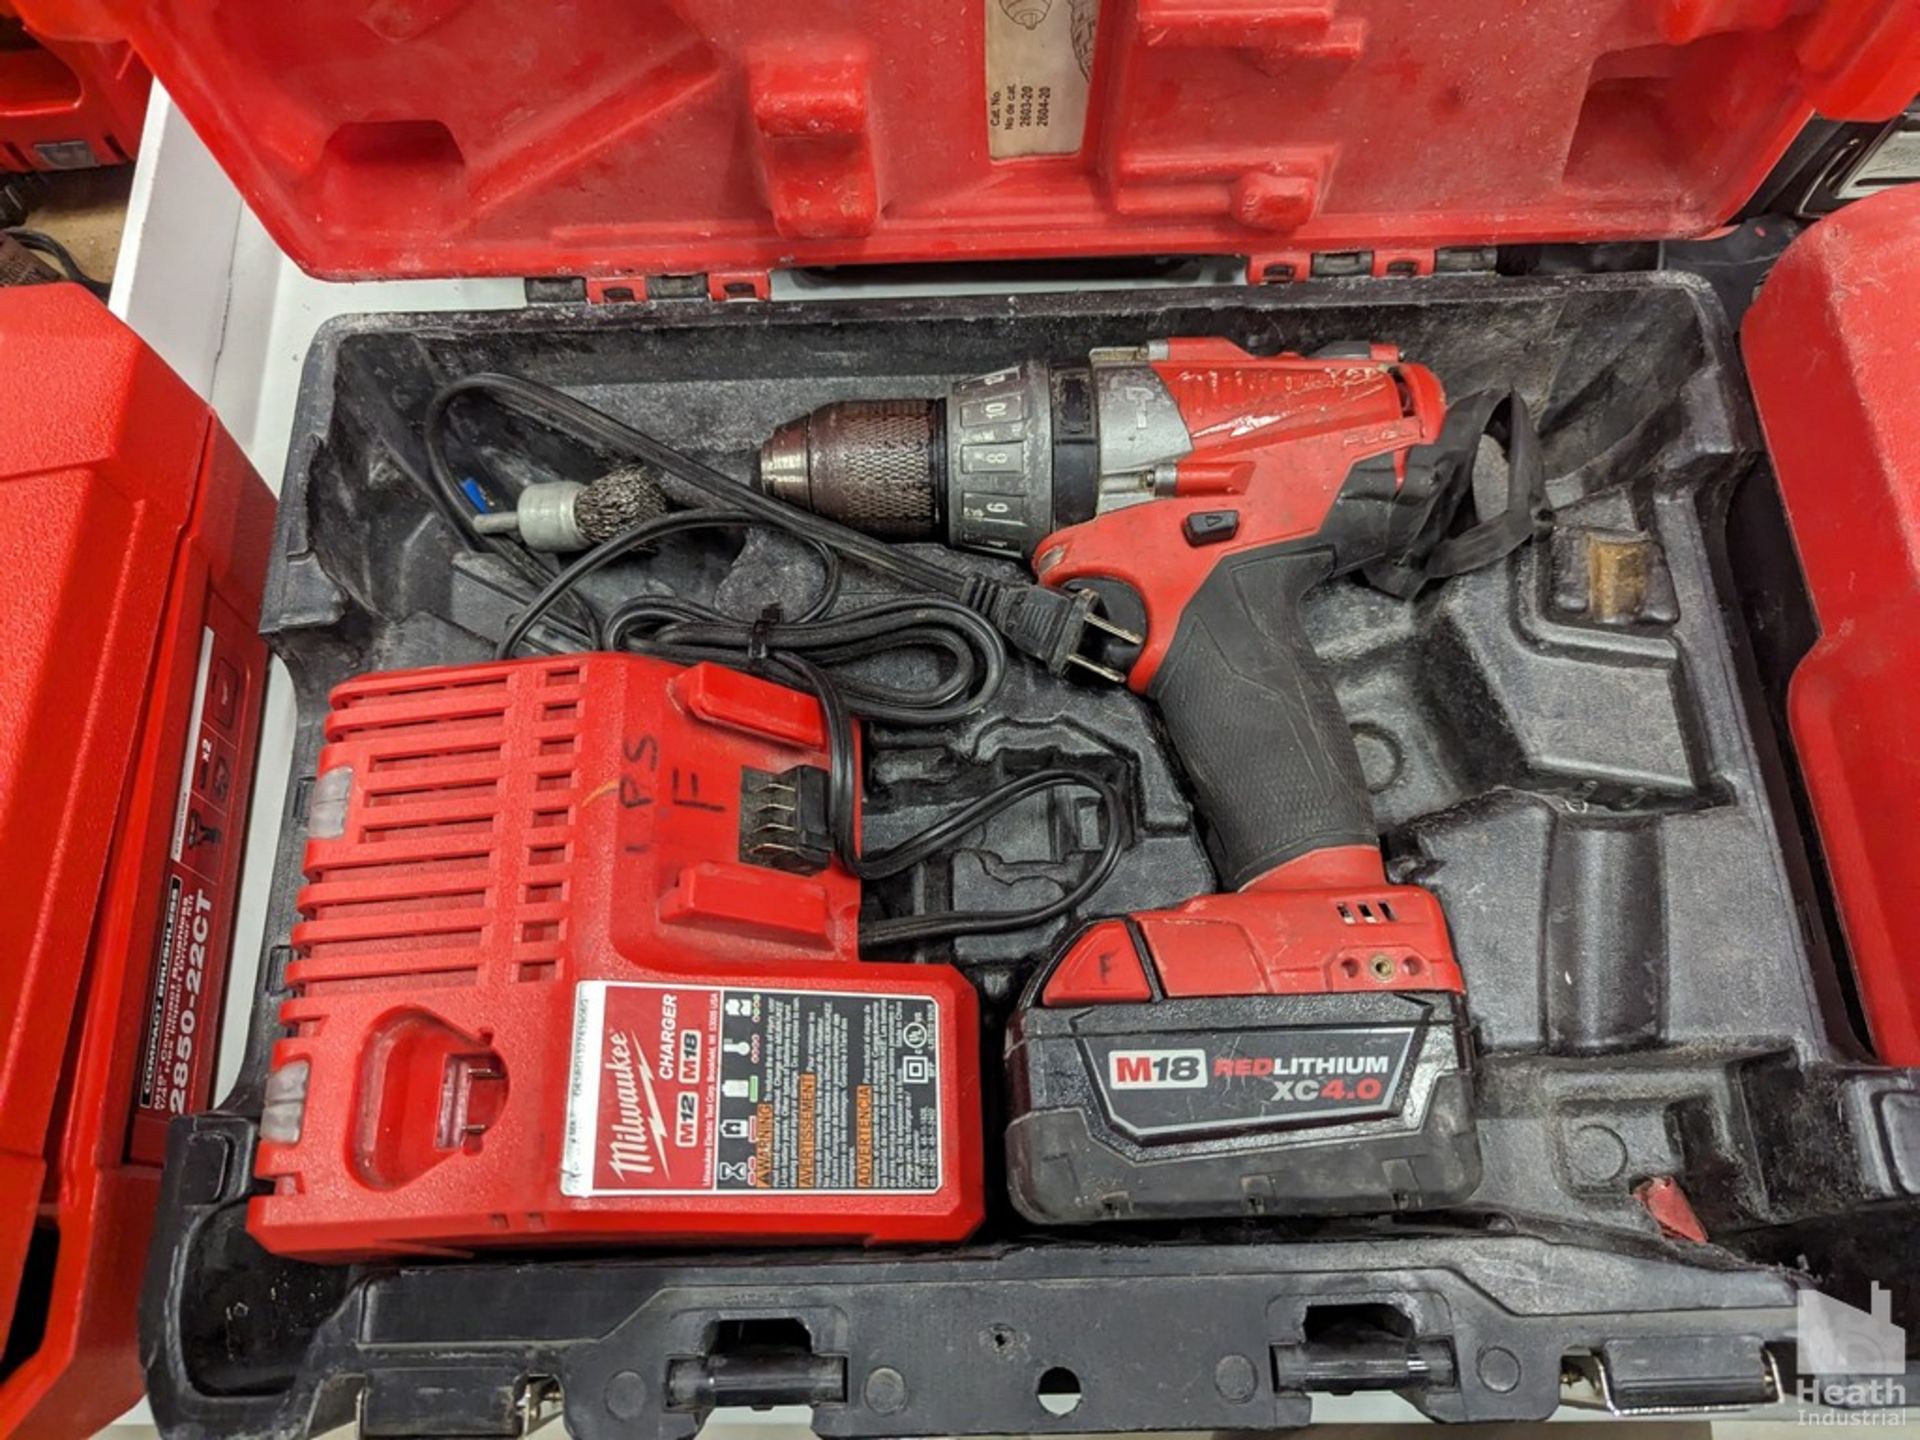 MILWAUKEE 18 VOLT HAMMER DRILL, BATTERY, CHARGER AND CASE